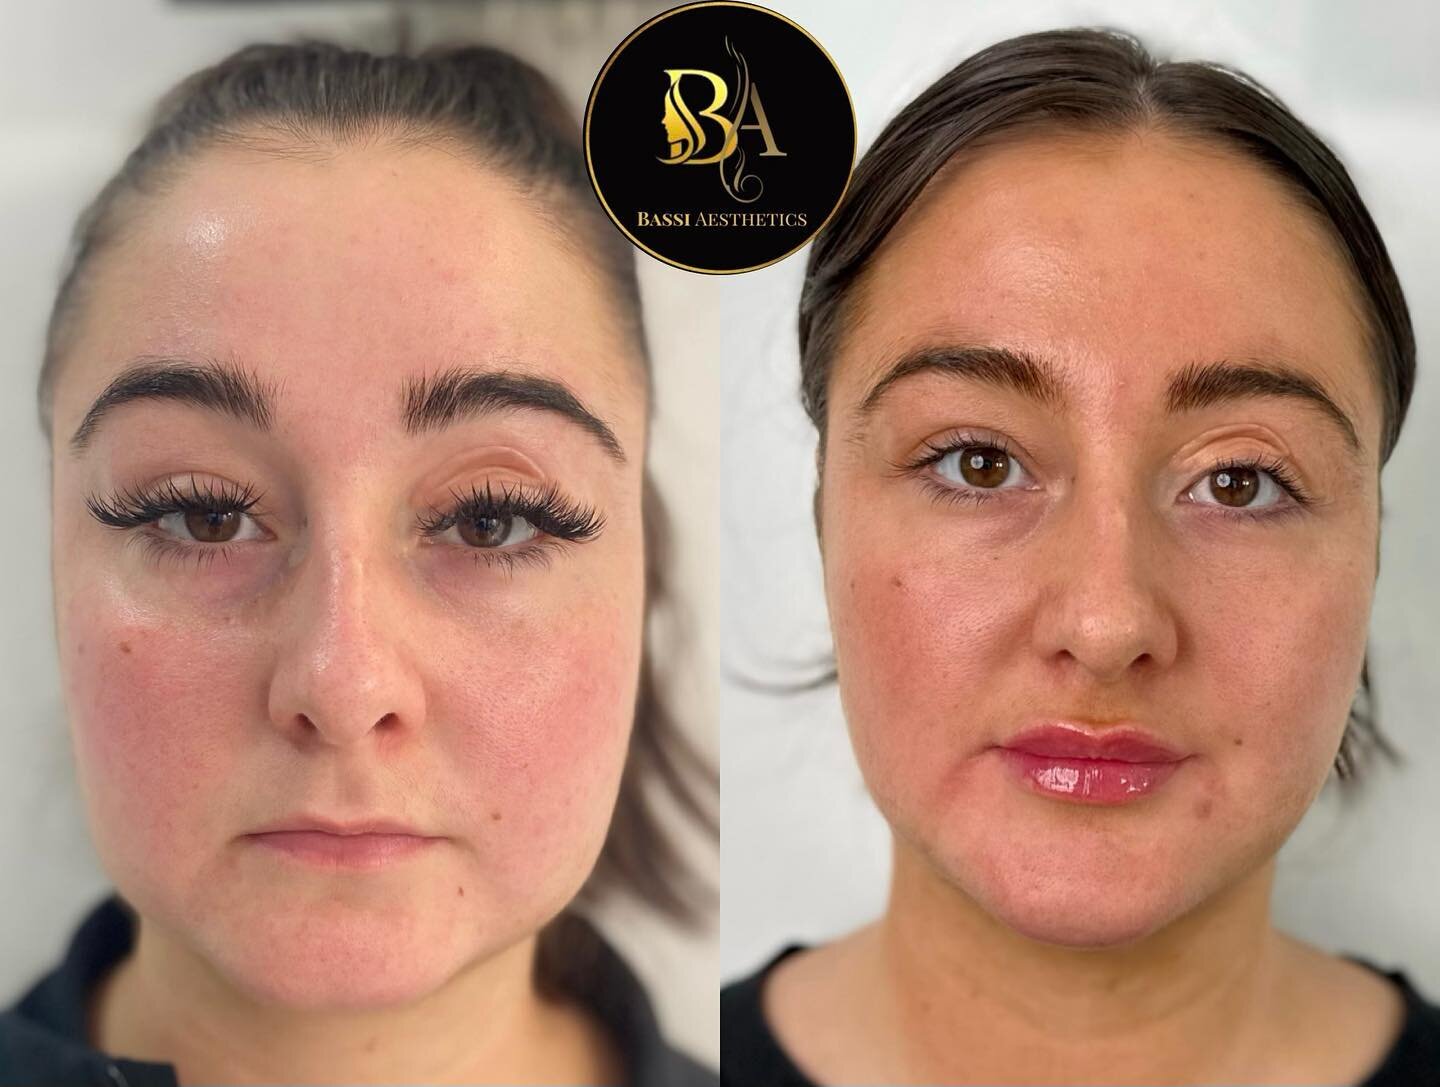 The areas we treated for our lovely patient are: 

🌟Masseter Anti-wrinkle to debulk the jaw area and slim down the face 
🌟Lip filler to volumize &amp; add fullness to the lips
🌟Chin filler to add length to the chin which slims down face, and to na